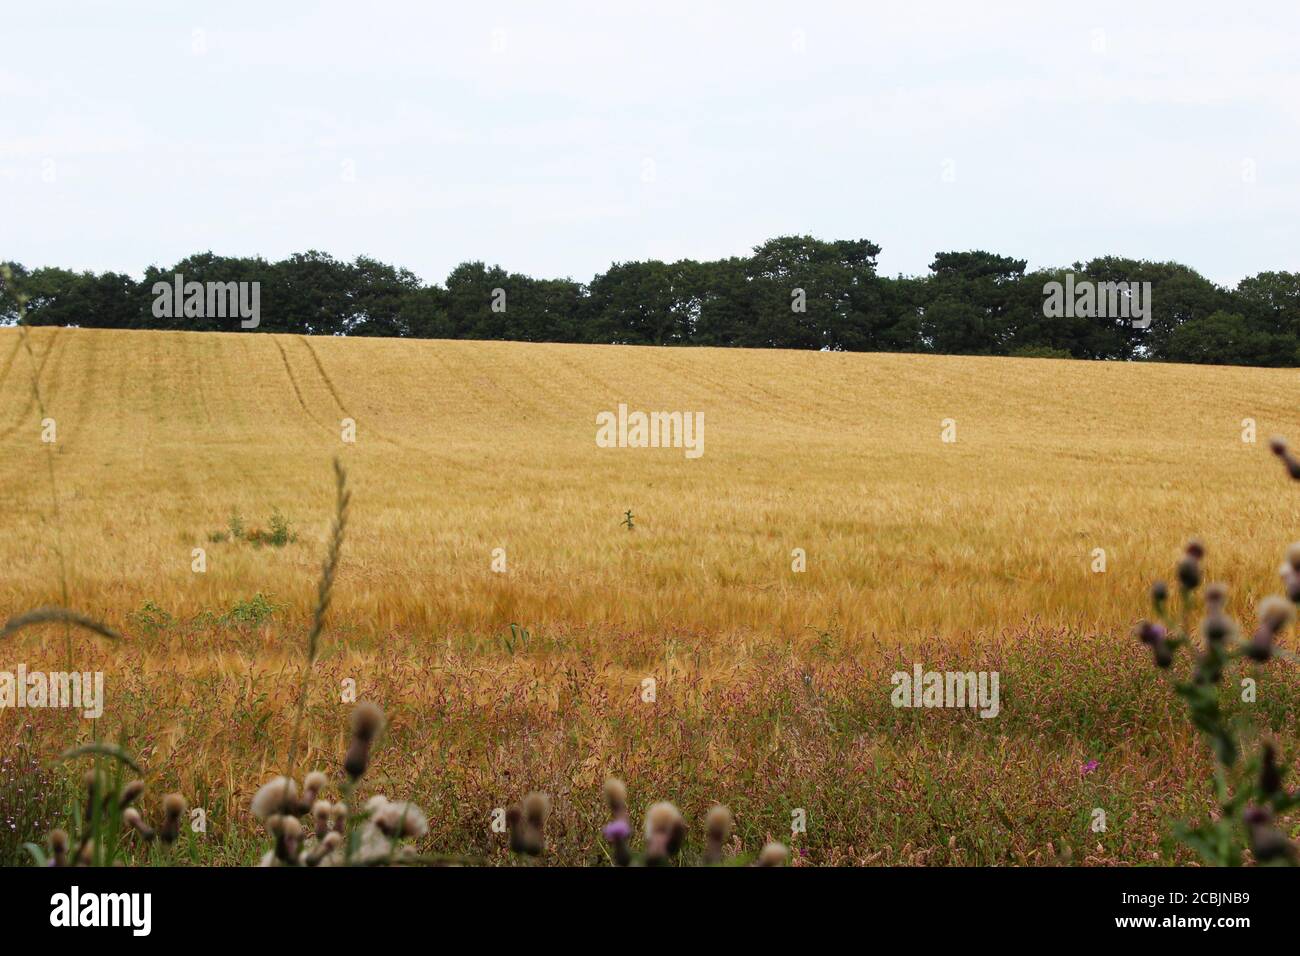 Big field of growing rye (Secale cereale) in Pickmere, England Stock Photo